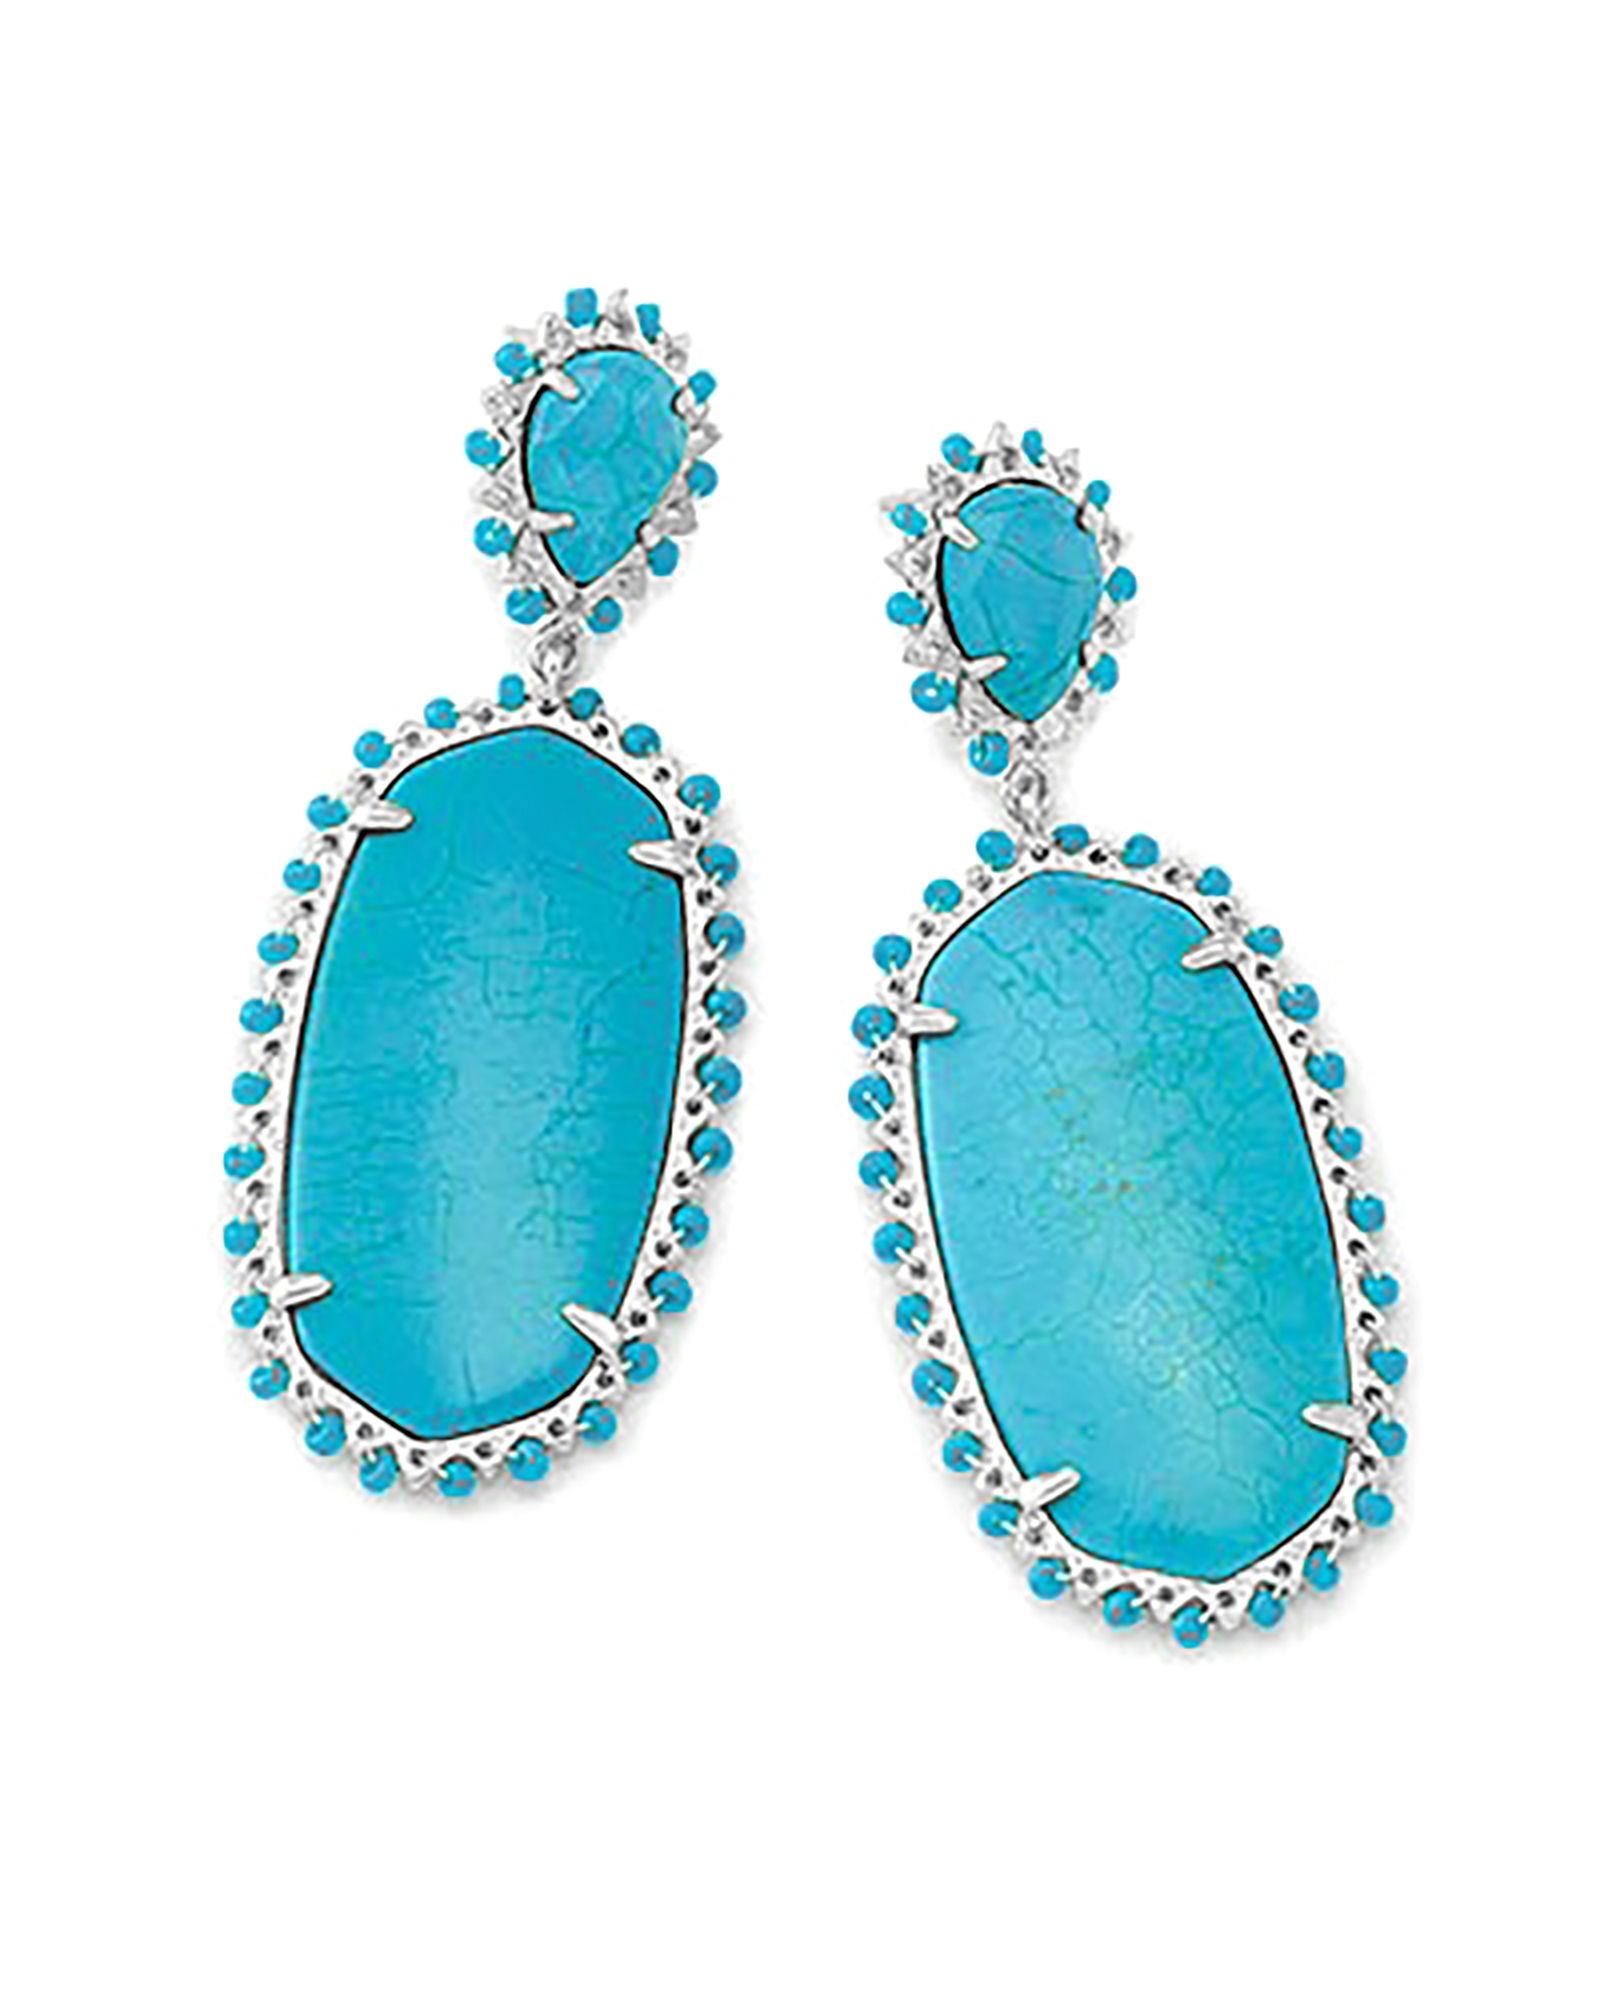 Parsons Statement Earring in Silver Turquoise Magnesite